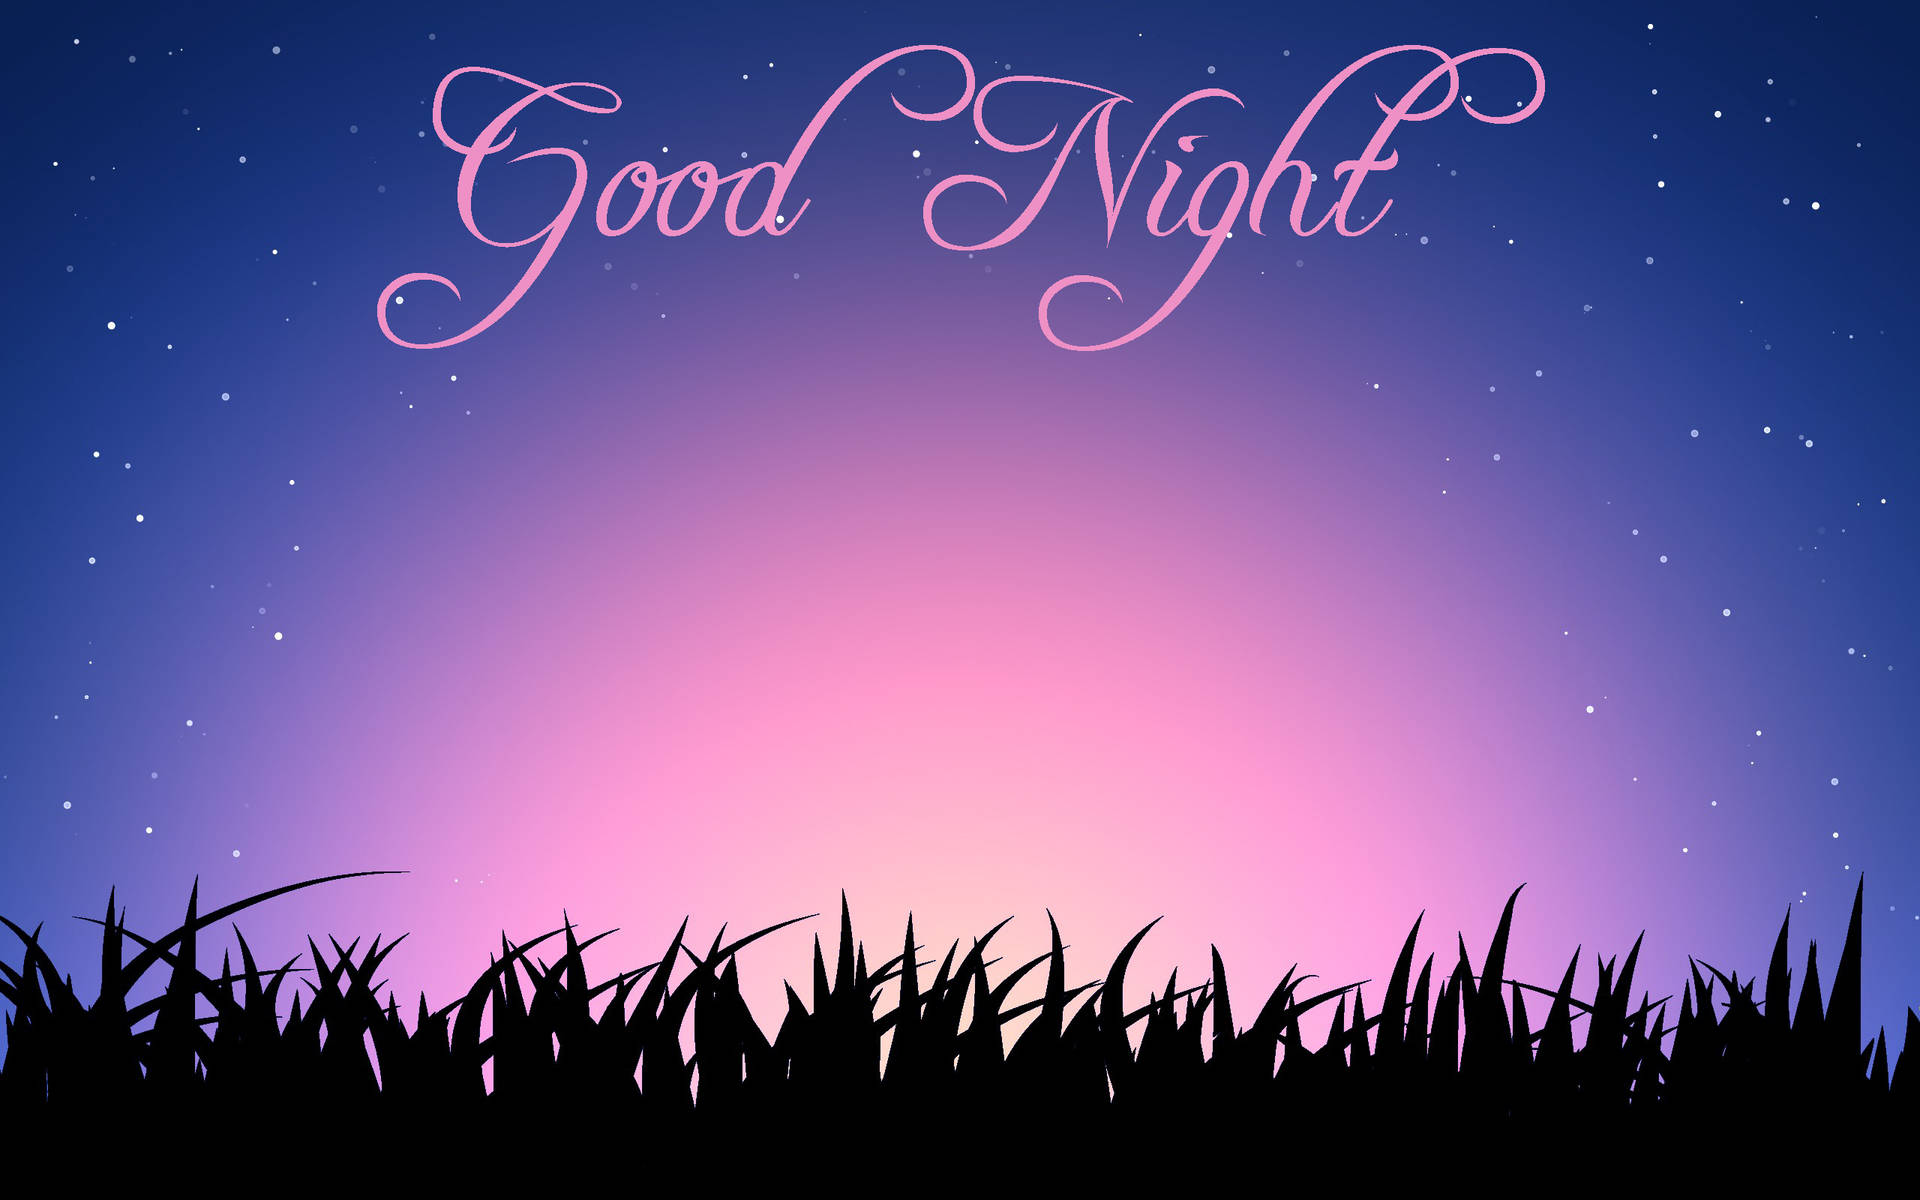 Free Good Night Wallpaper Downloads, [100+] Good Night Wallpapers for FREE  